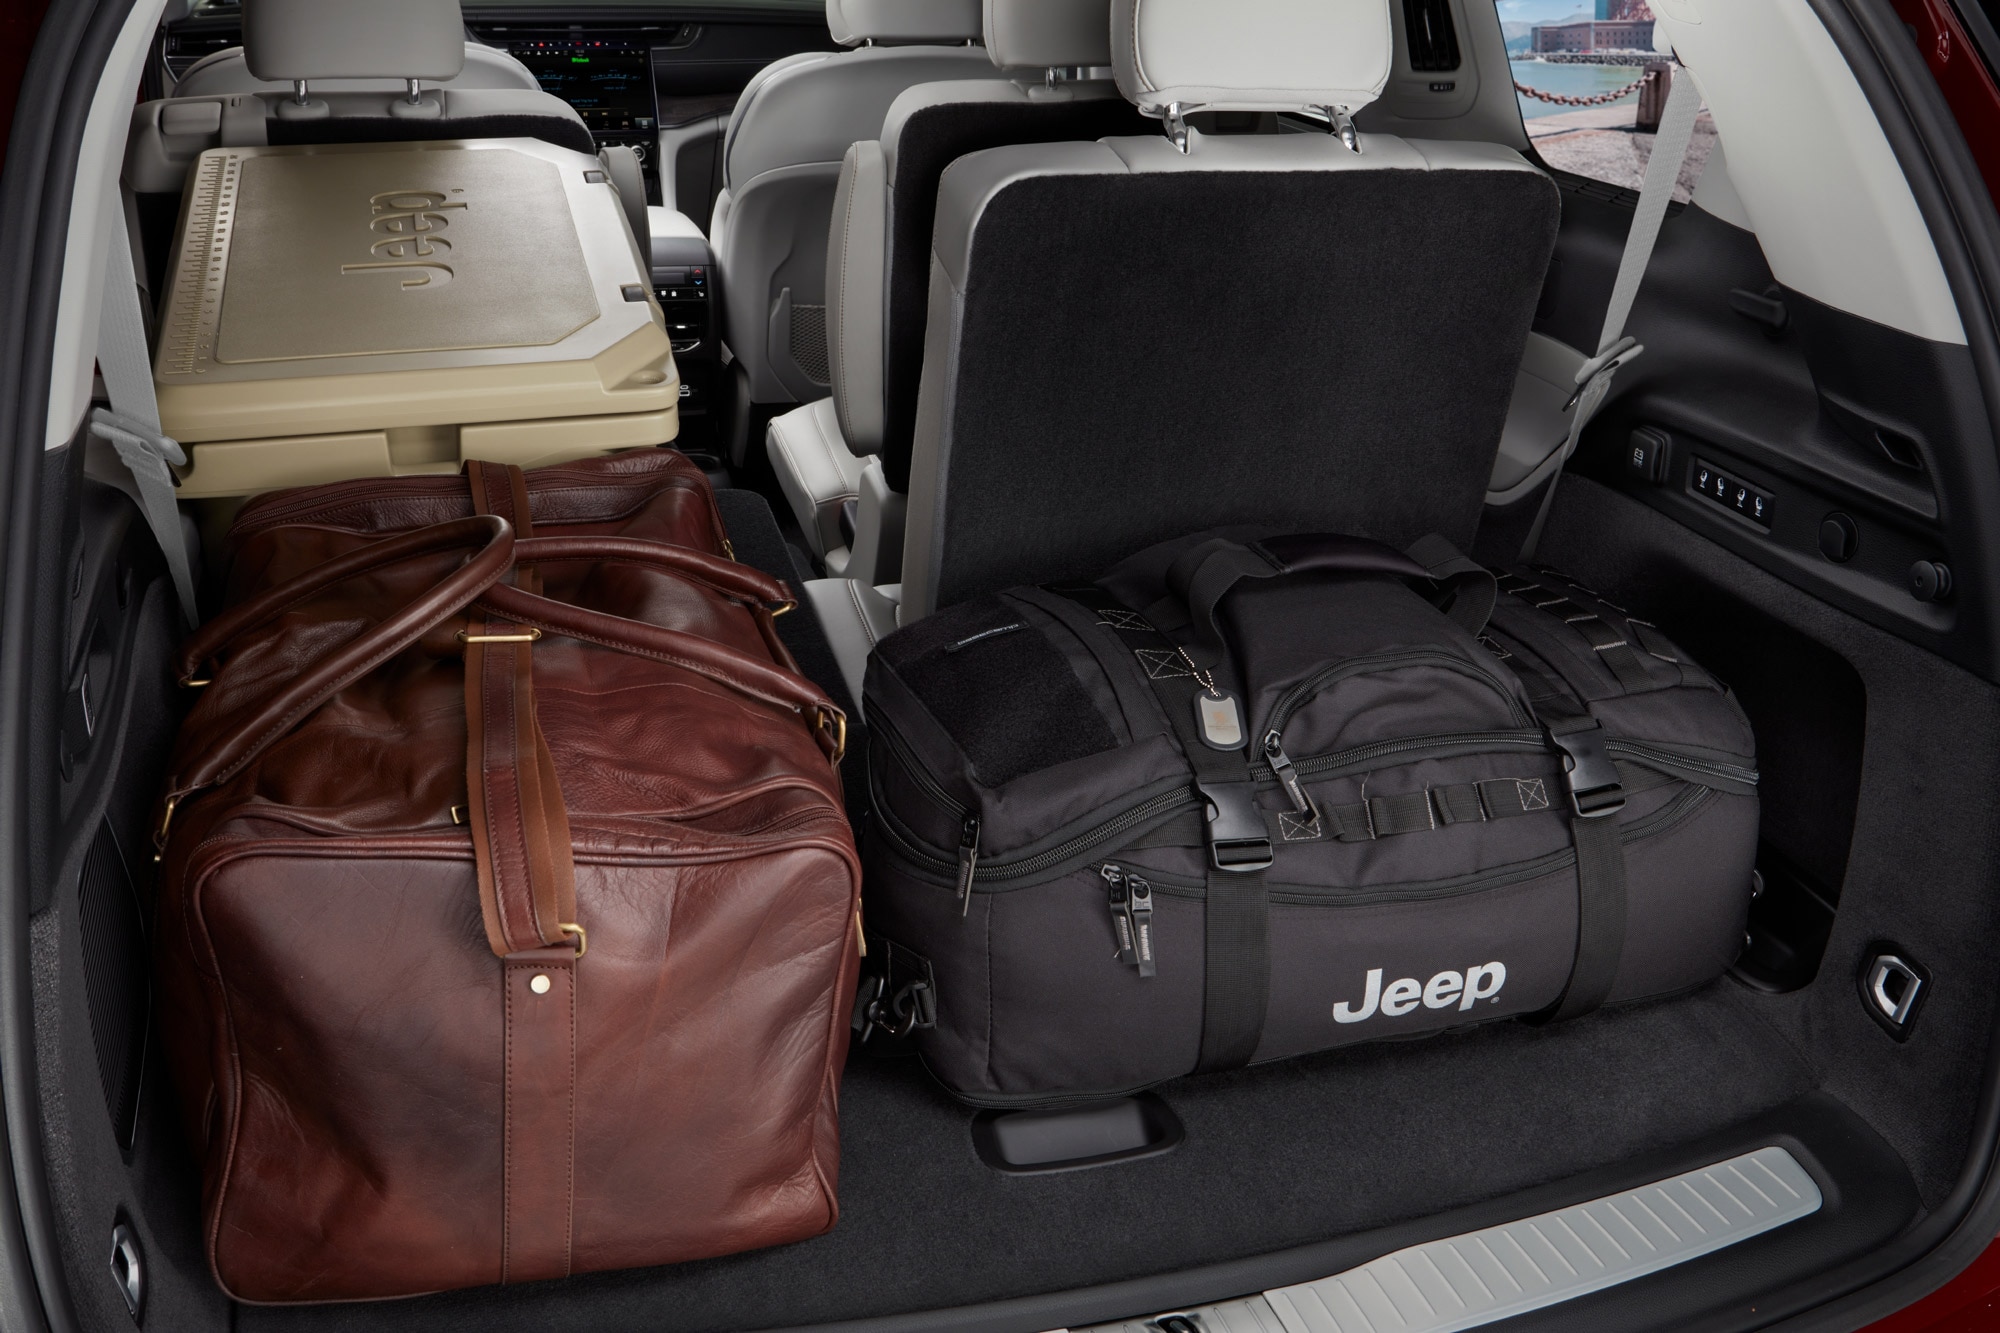 2023 Jeep Grand Cherokee L Overland interior and cargo space